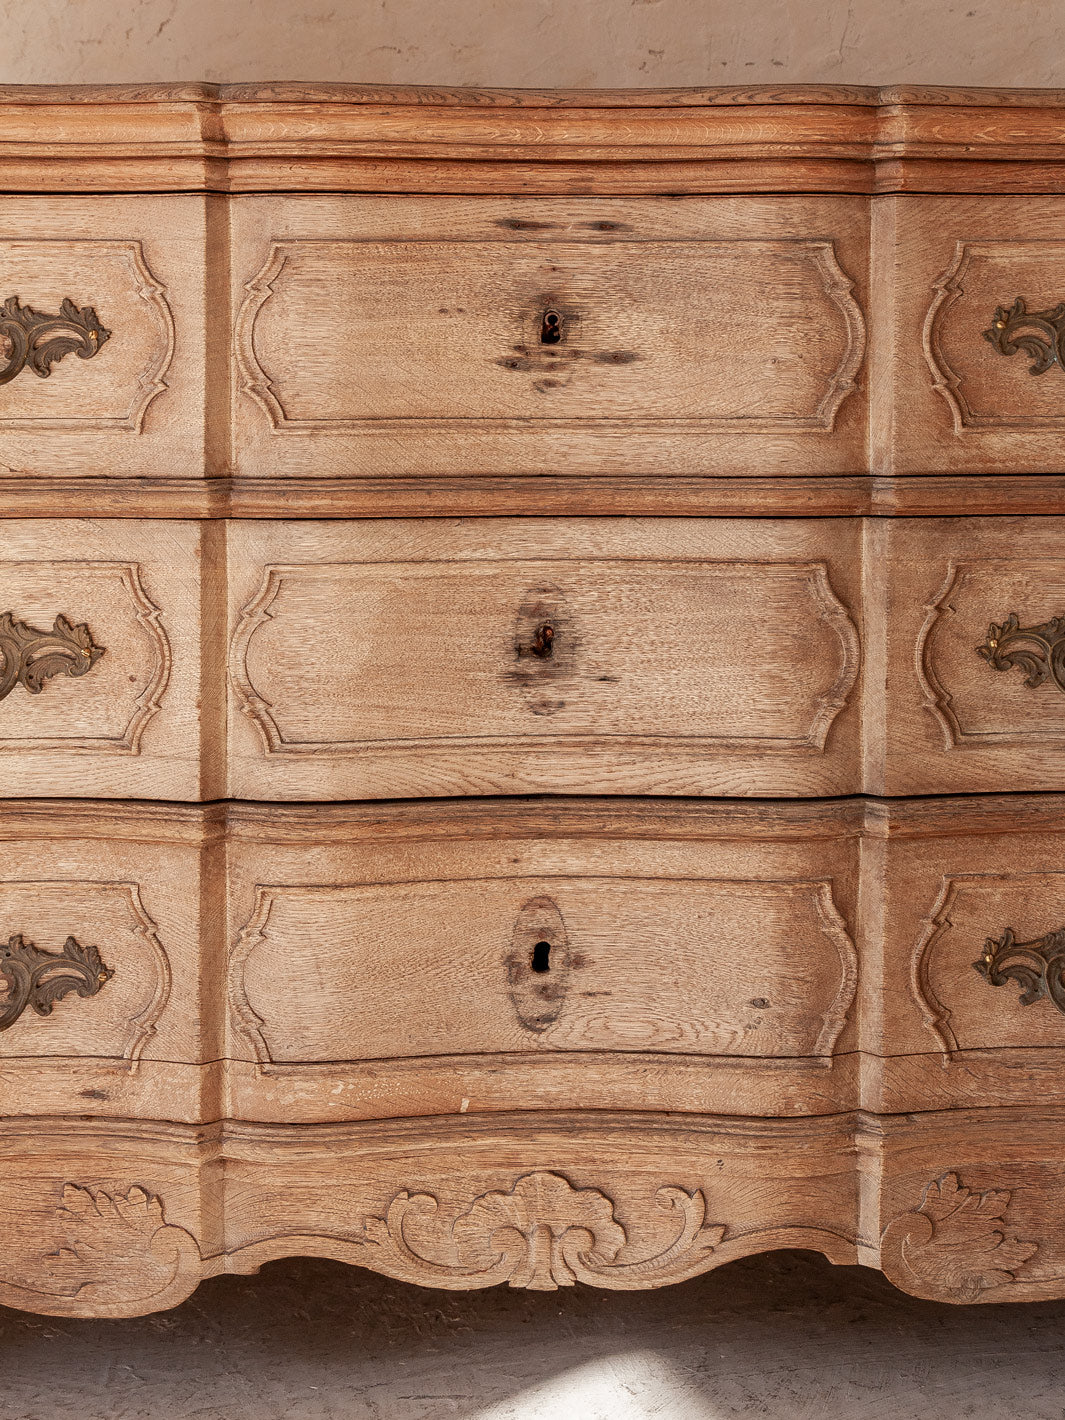 Liege chest of drawers 18th century washed chestnut